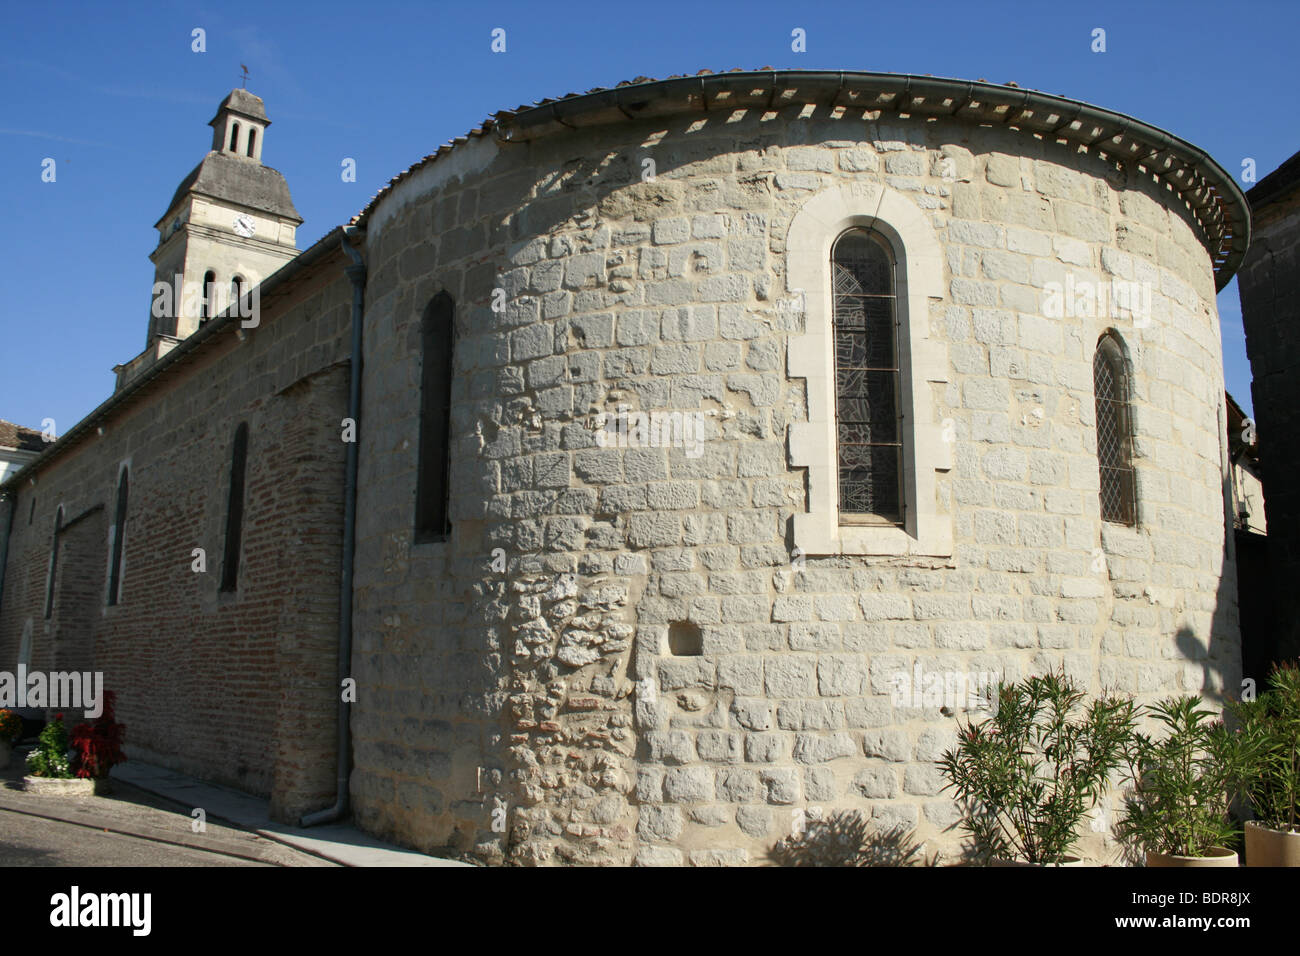 The 10th century church of St Eutrope in the village of Allemans du Dropt, France Stock Photo